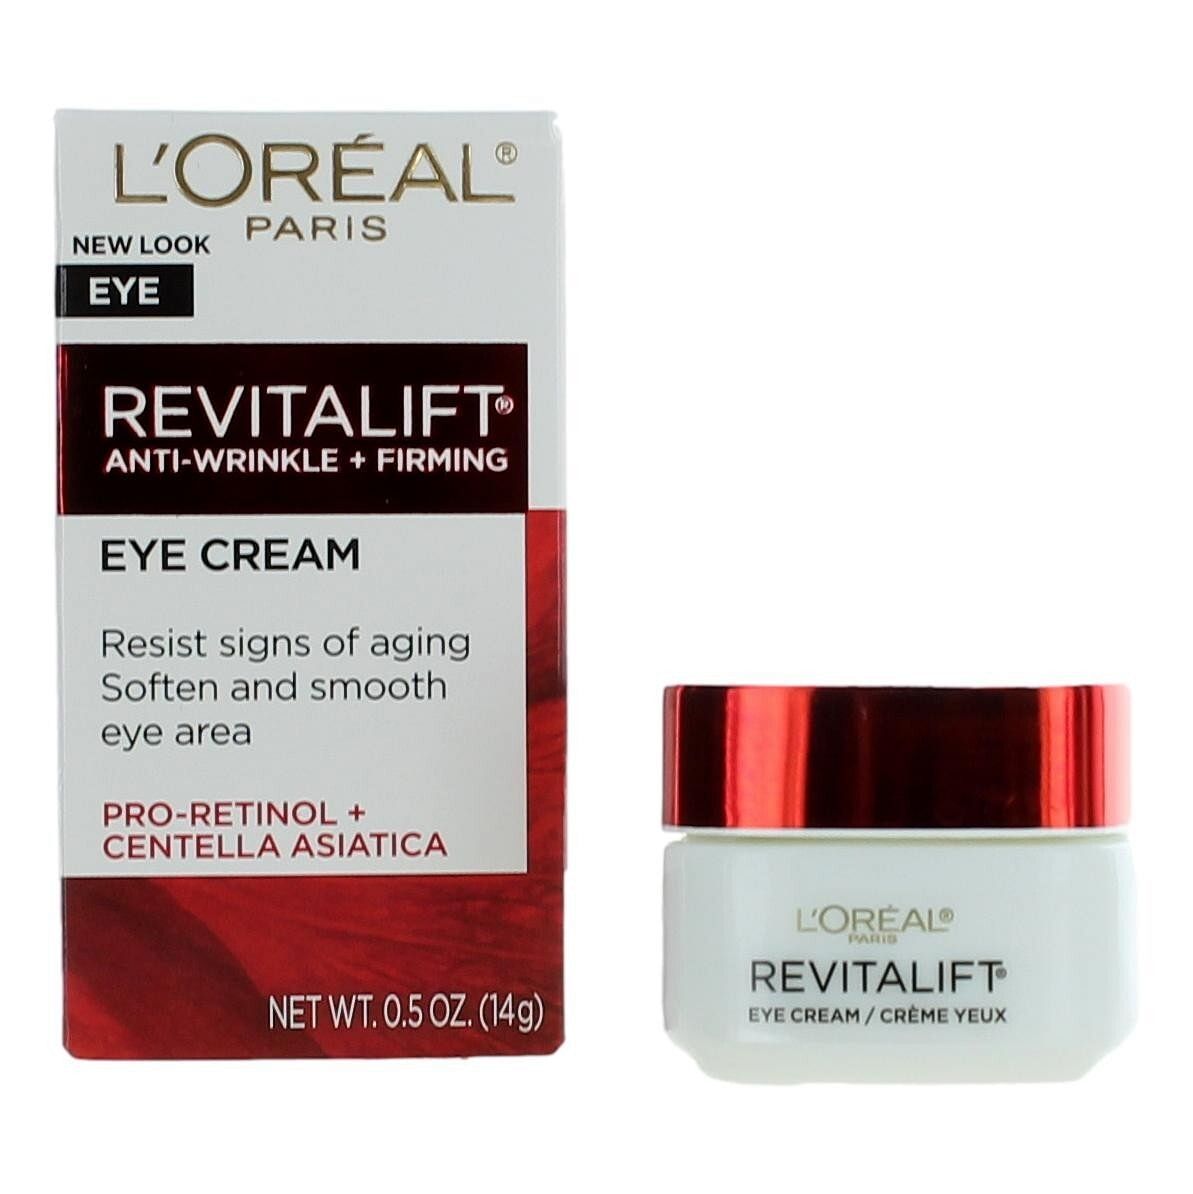 Primary image for L'Oreal Revitalift Anti-Wrinkle + Firming by L'Oreal, 0.5 oz Eye Cream